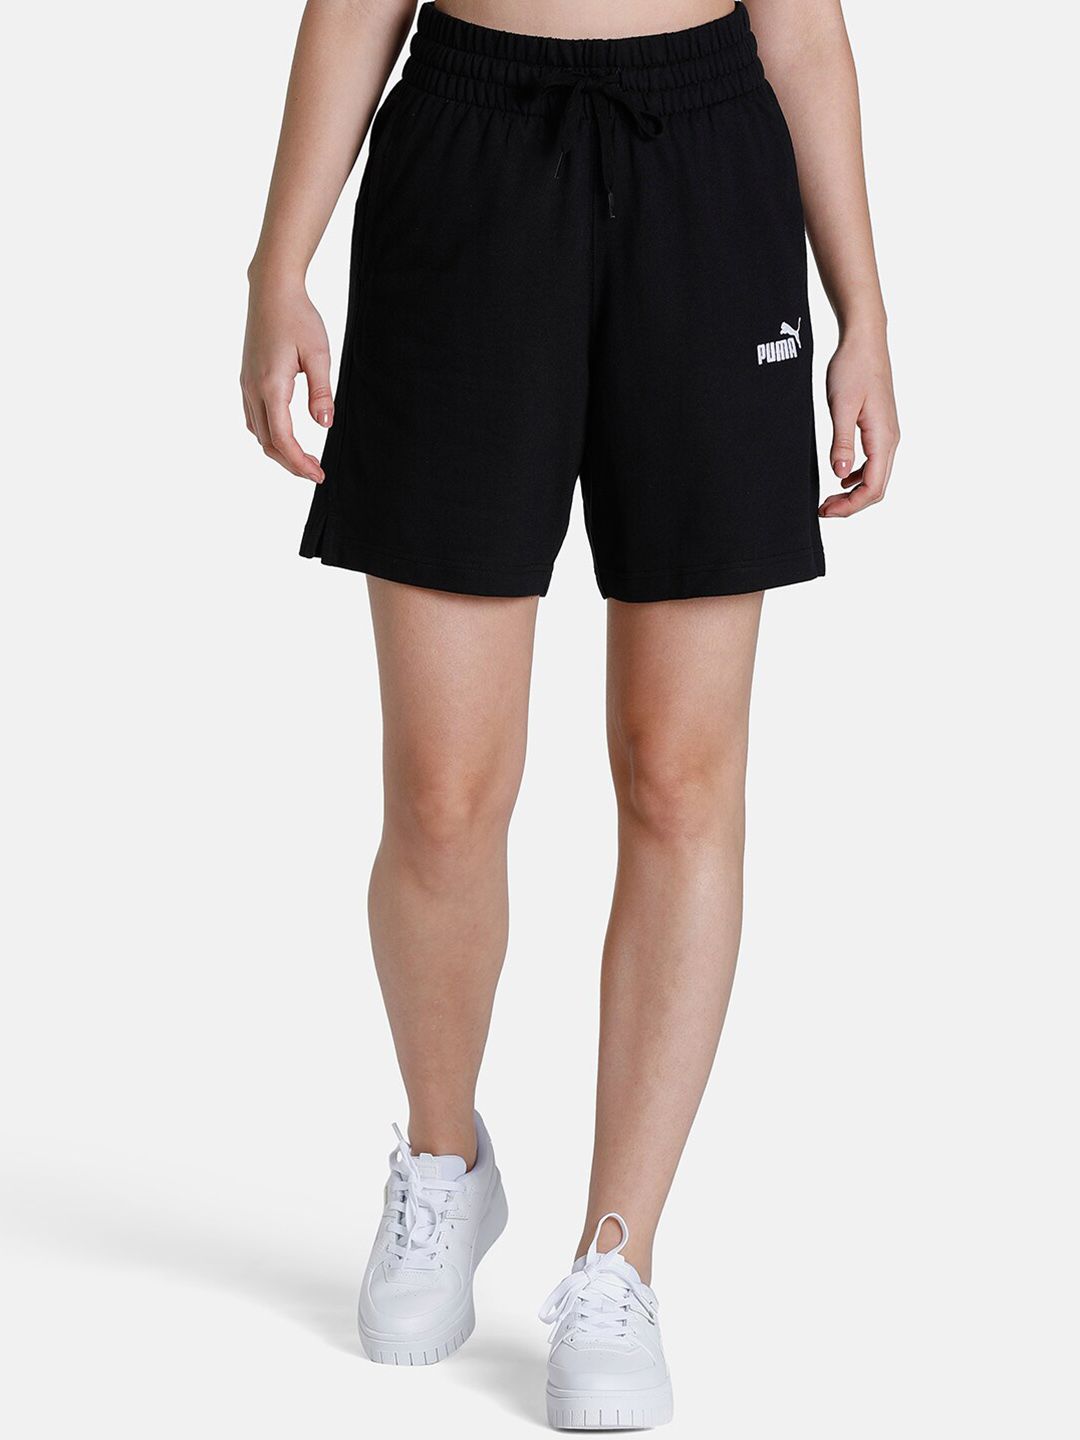 Puma solid shorts - Buy online in India